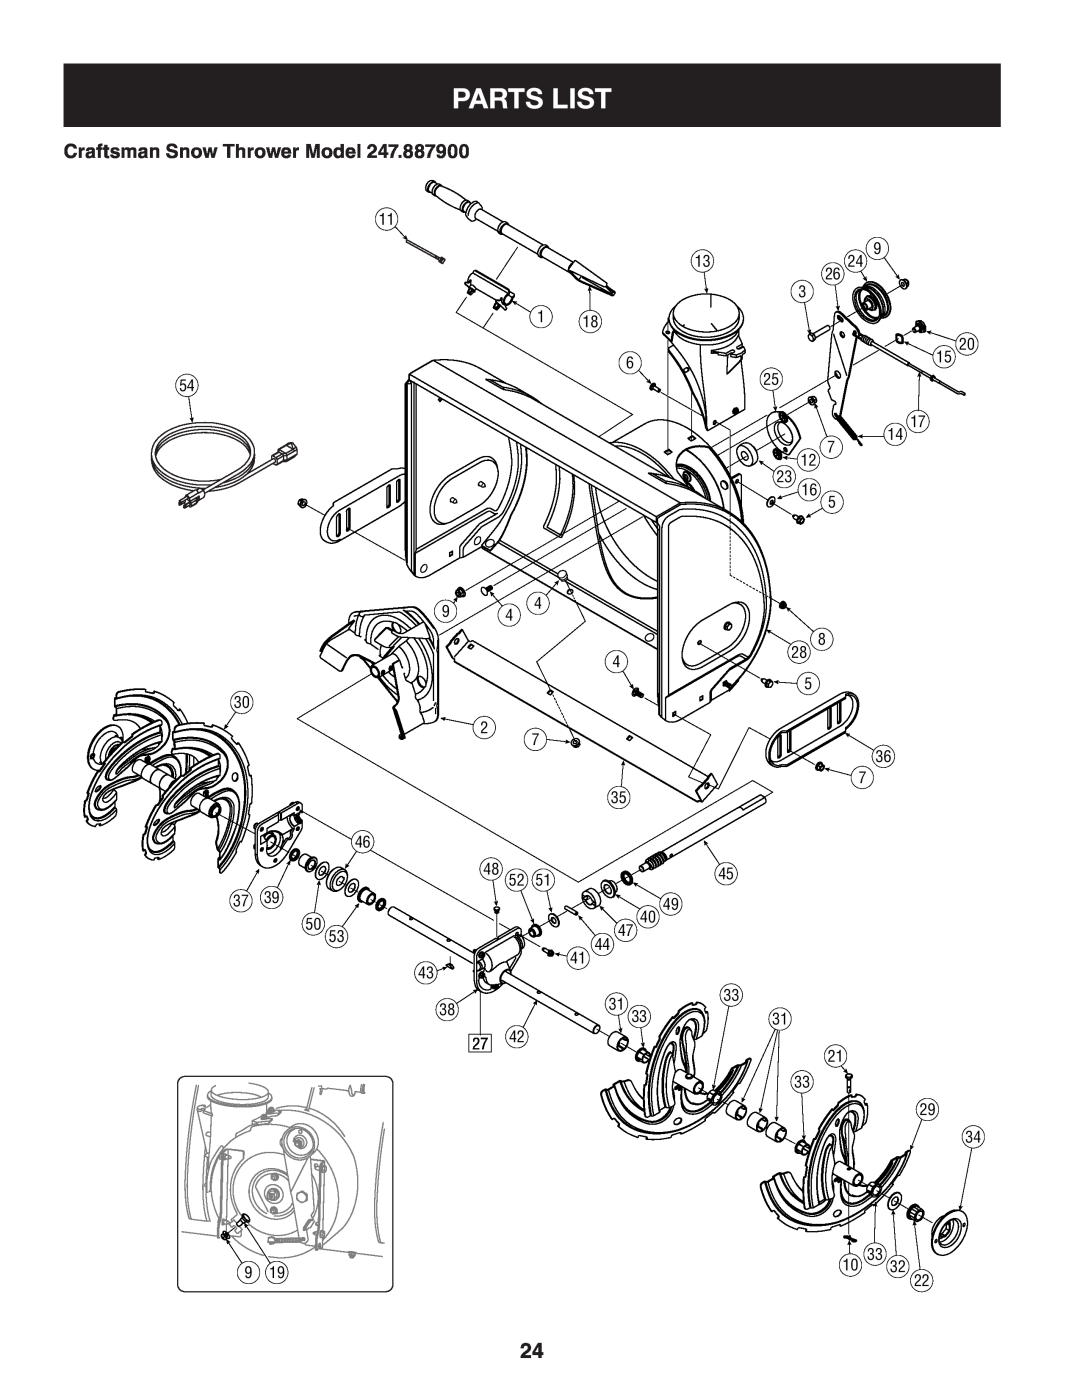 Sears 247.8879 operating instructions Parts List, Craftsman Snow Thrower Model 